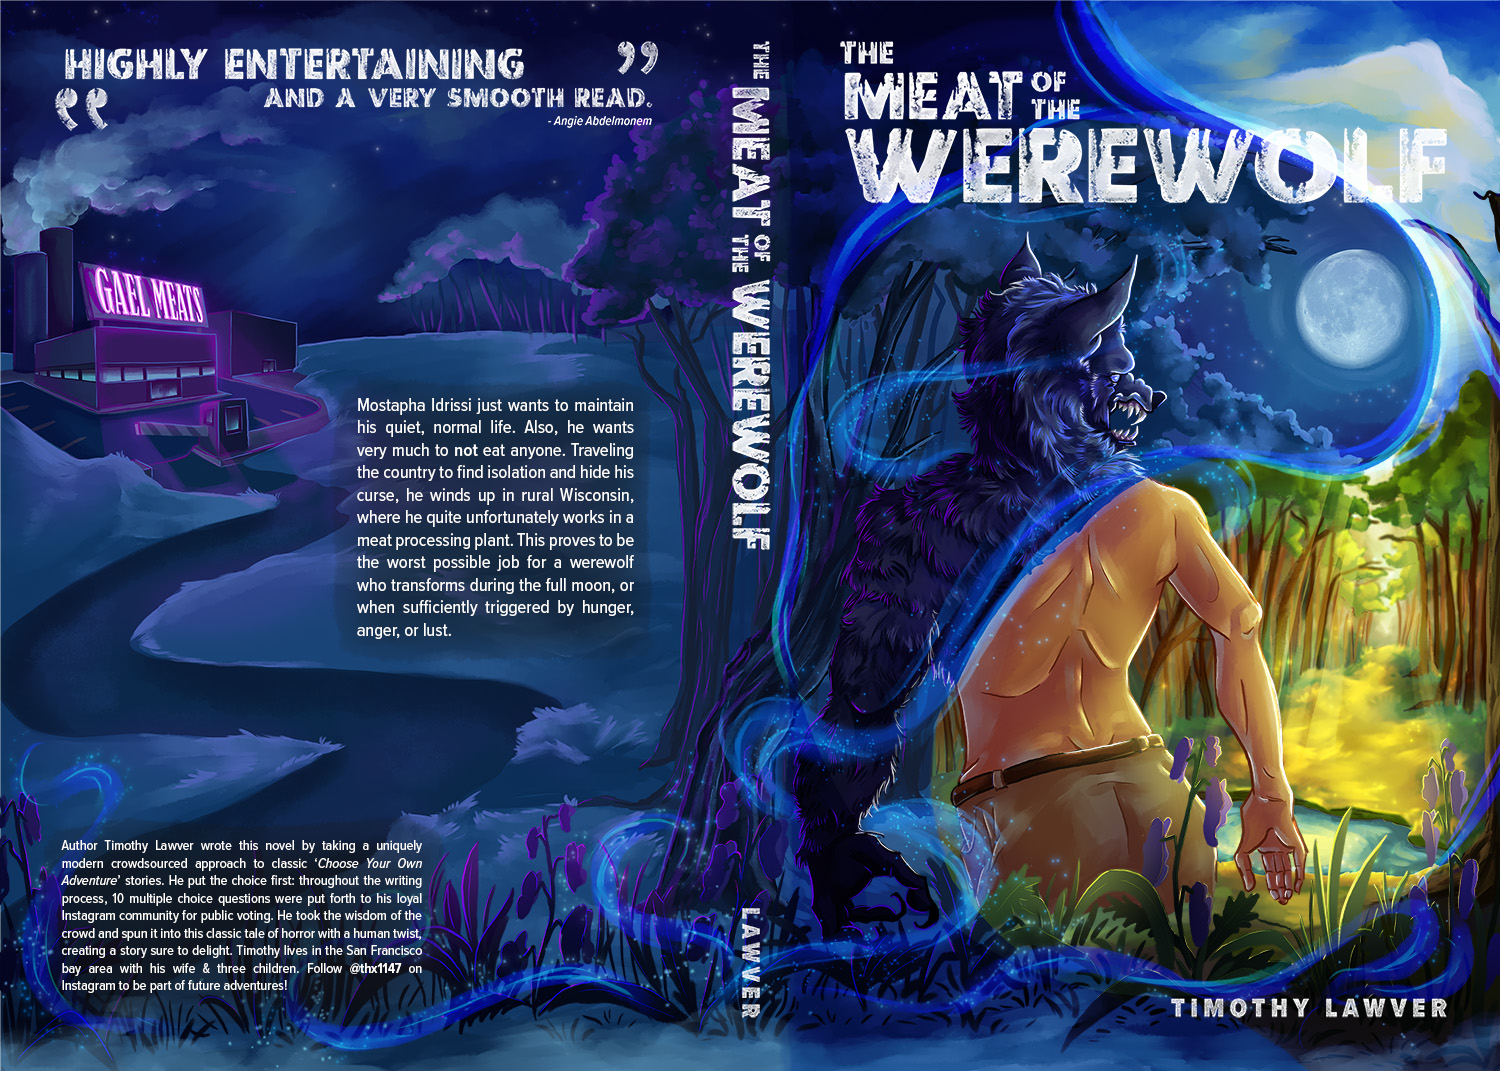 An original digitally painted book cover for 'The Meat of the Werewolf' by Timothy Lawver. Painting by Sarah Black, concept and typography by Heather Lawver.